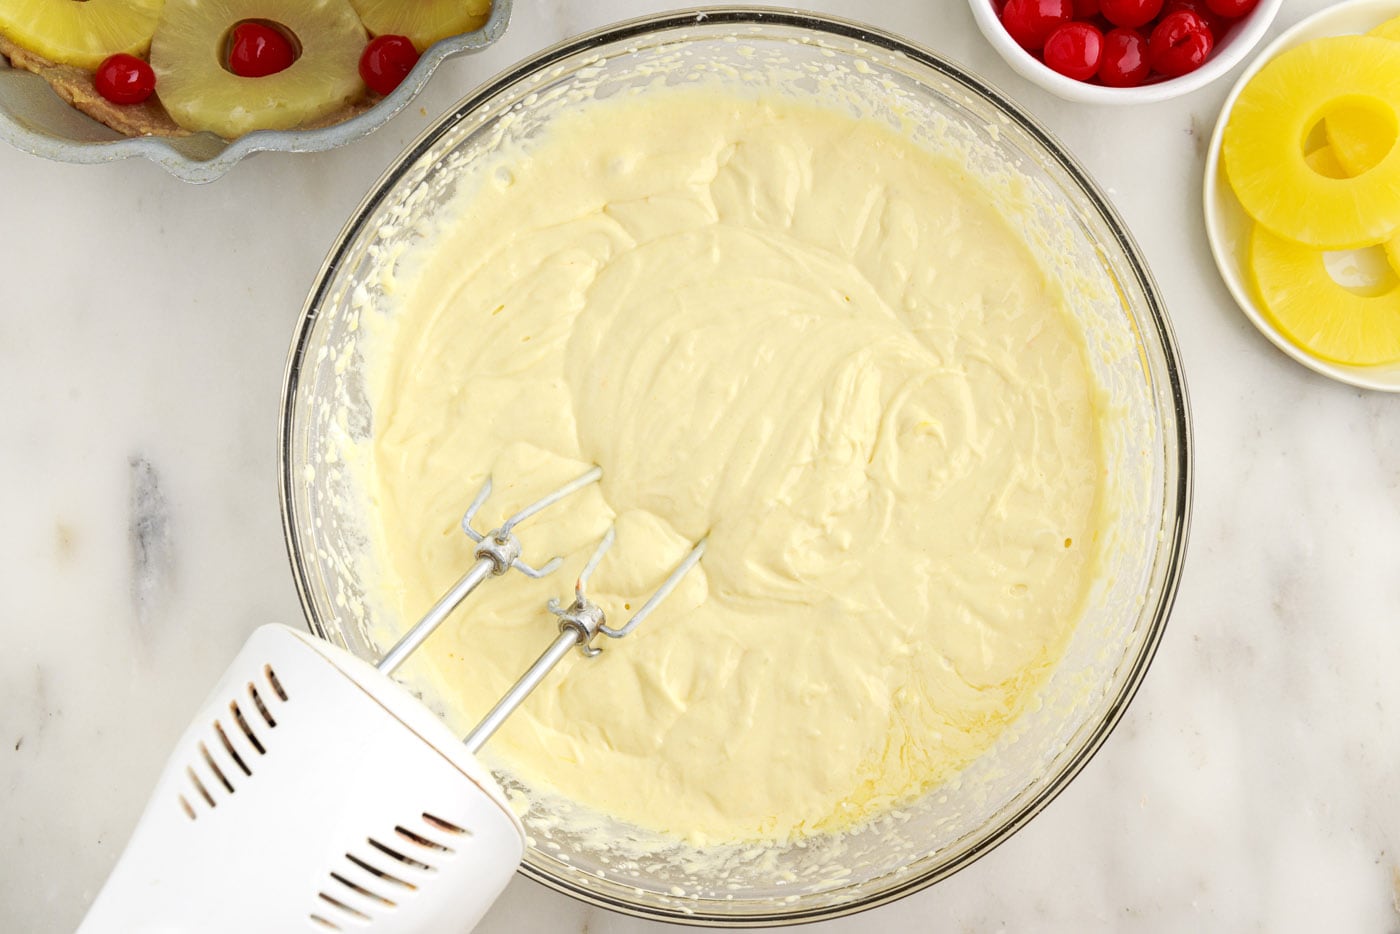 bundt cake batter in a bowl with a mixer